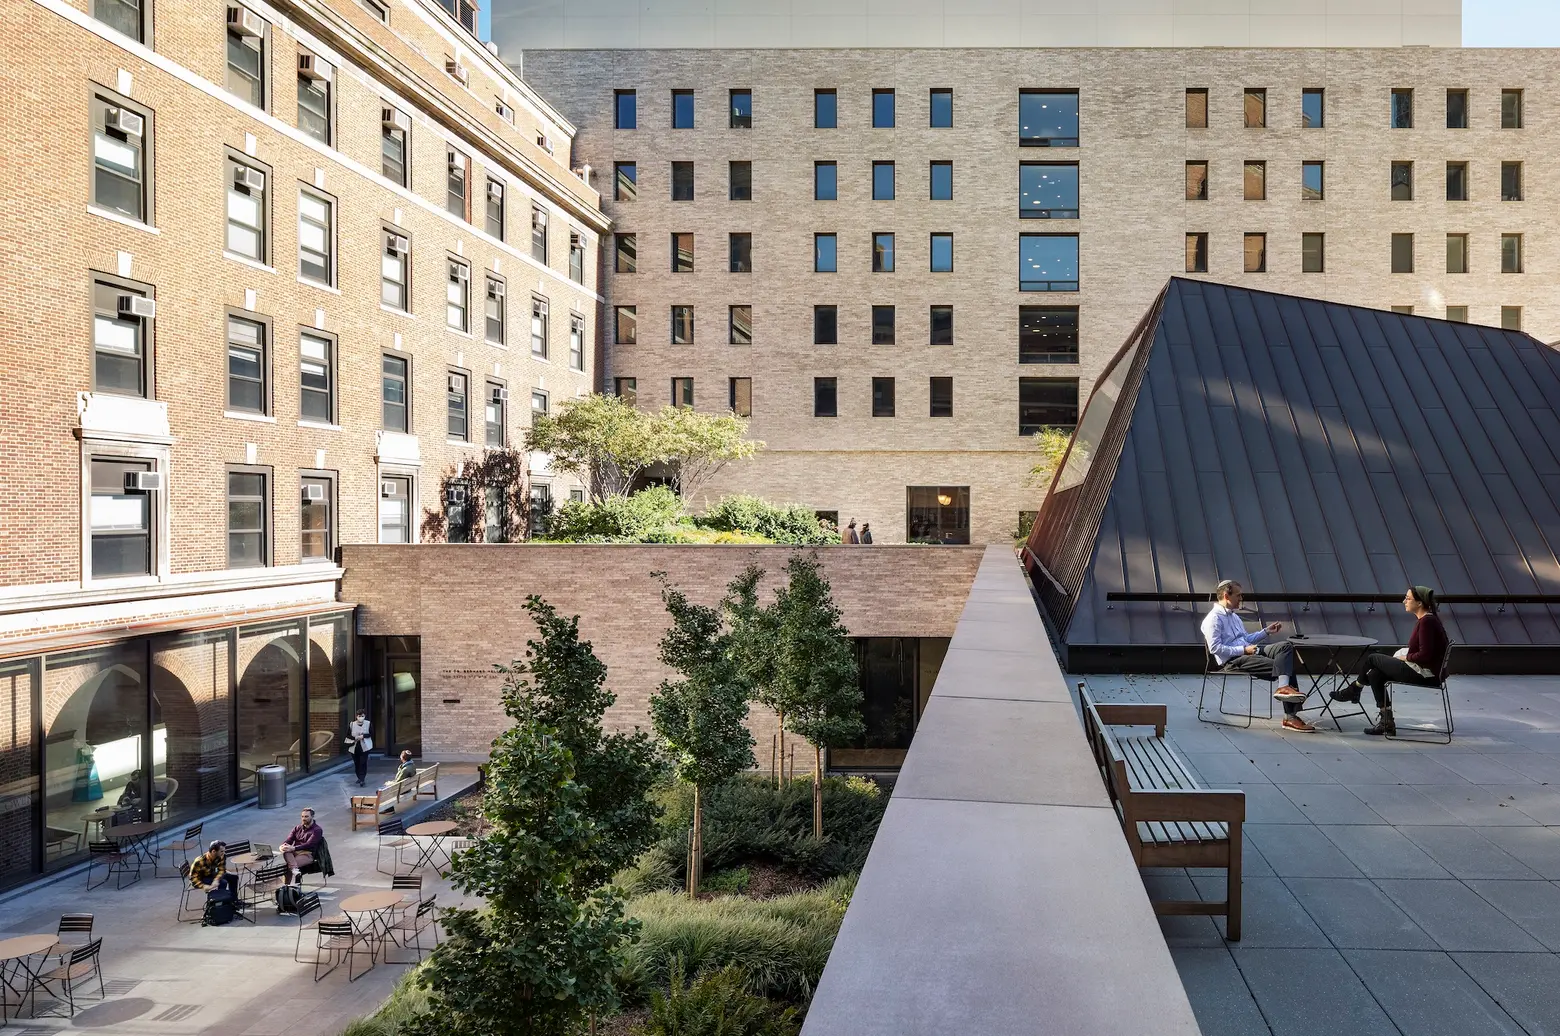 NYC architects reimagine the Jewish Theological Seminary’s Morningside Heights campus